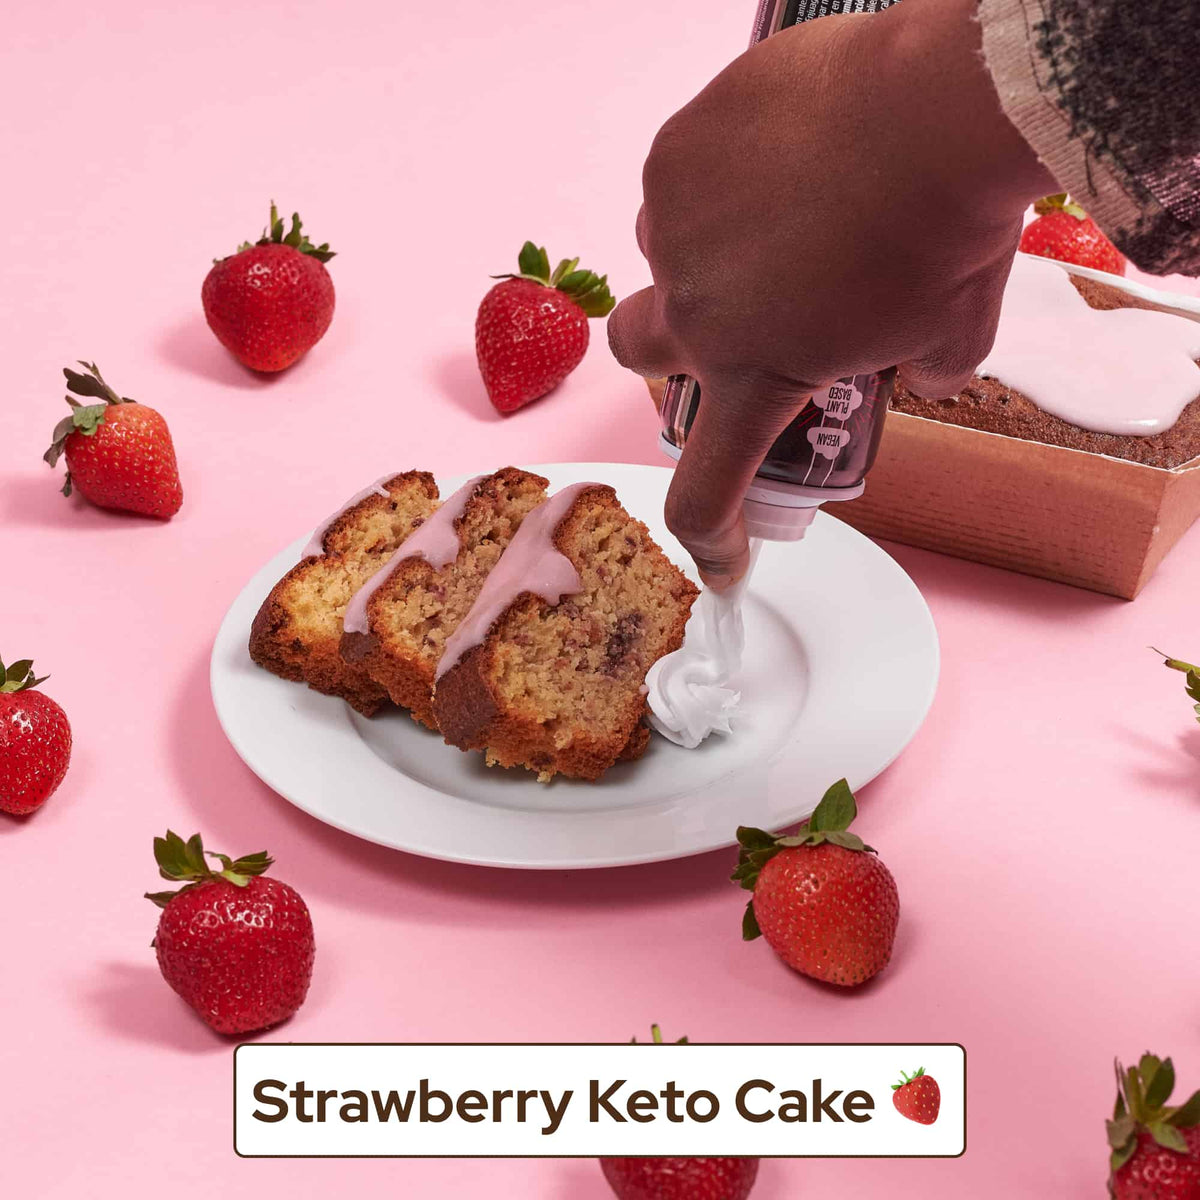 A person is slicing a Summer Loaves Bundle, a delicious keto loaf perfect for tea-time trio, while keeping your carb intake in check with just 3g Net Carbs per 100g from No Guilt Bakes.